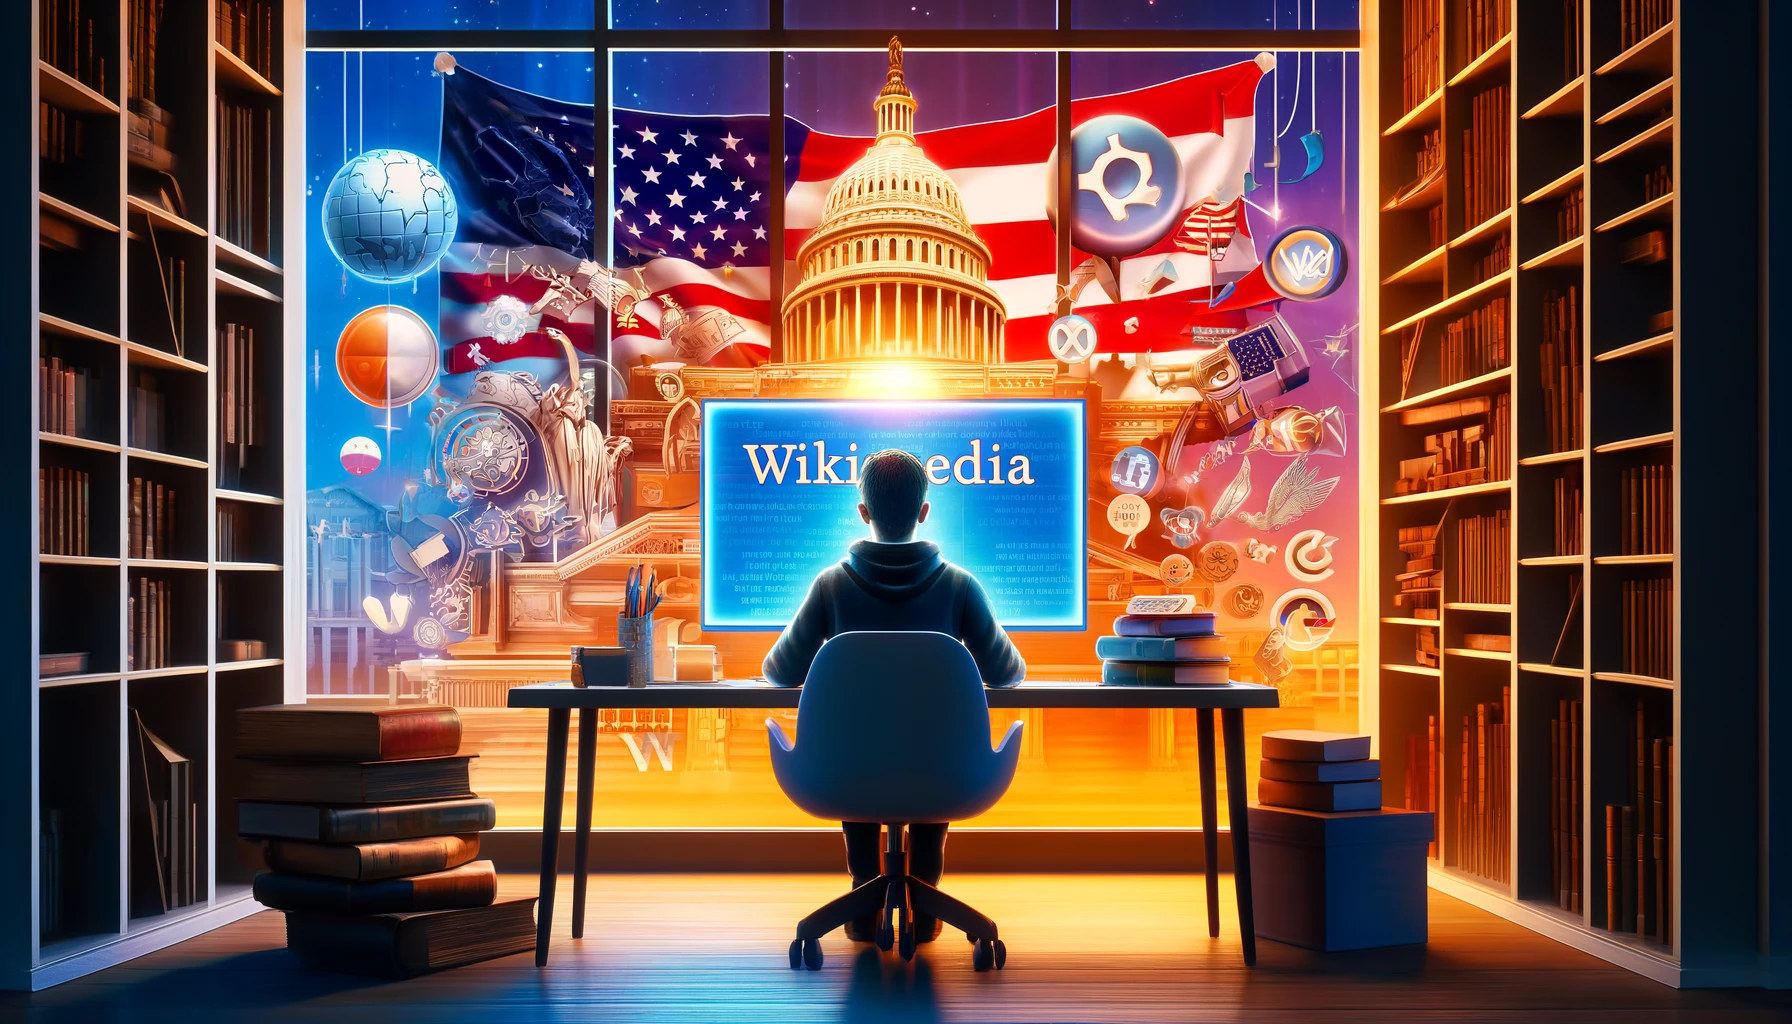 A person sits at a desk, engrossed in reading political content on Wikipedia on a computer screen, surrounded by books and political symbols.